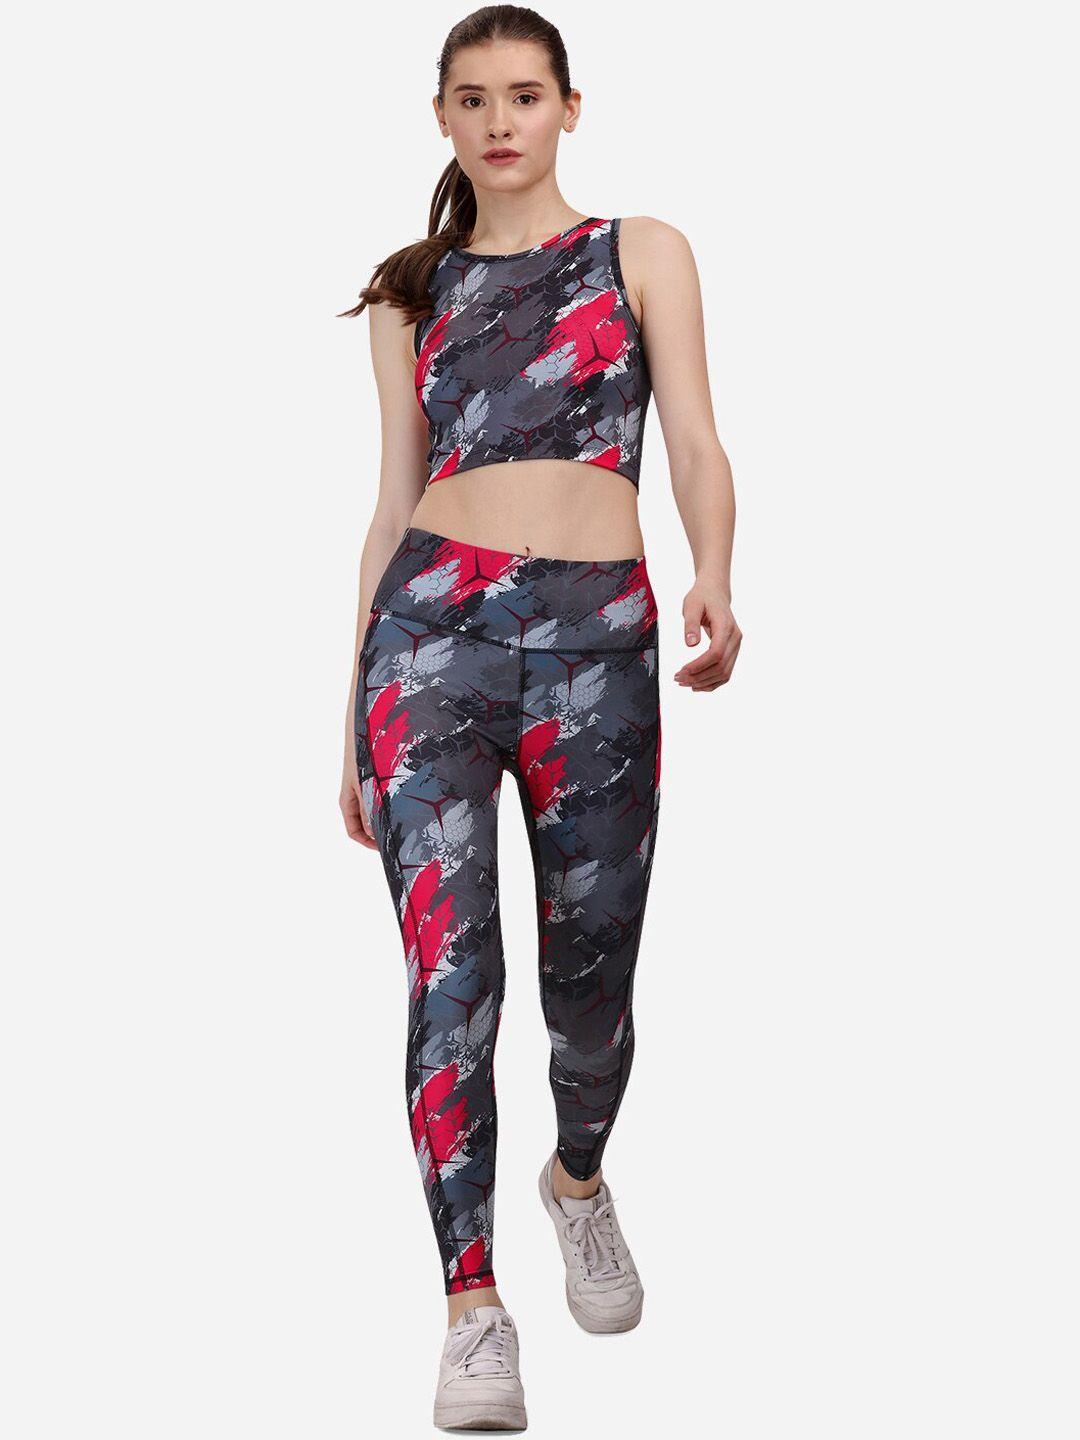 soie-abstract-printed-activewear-sports-crop-top-&-tights